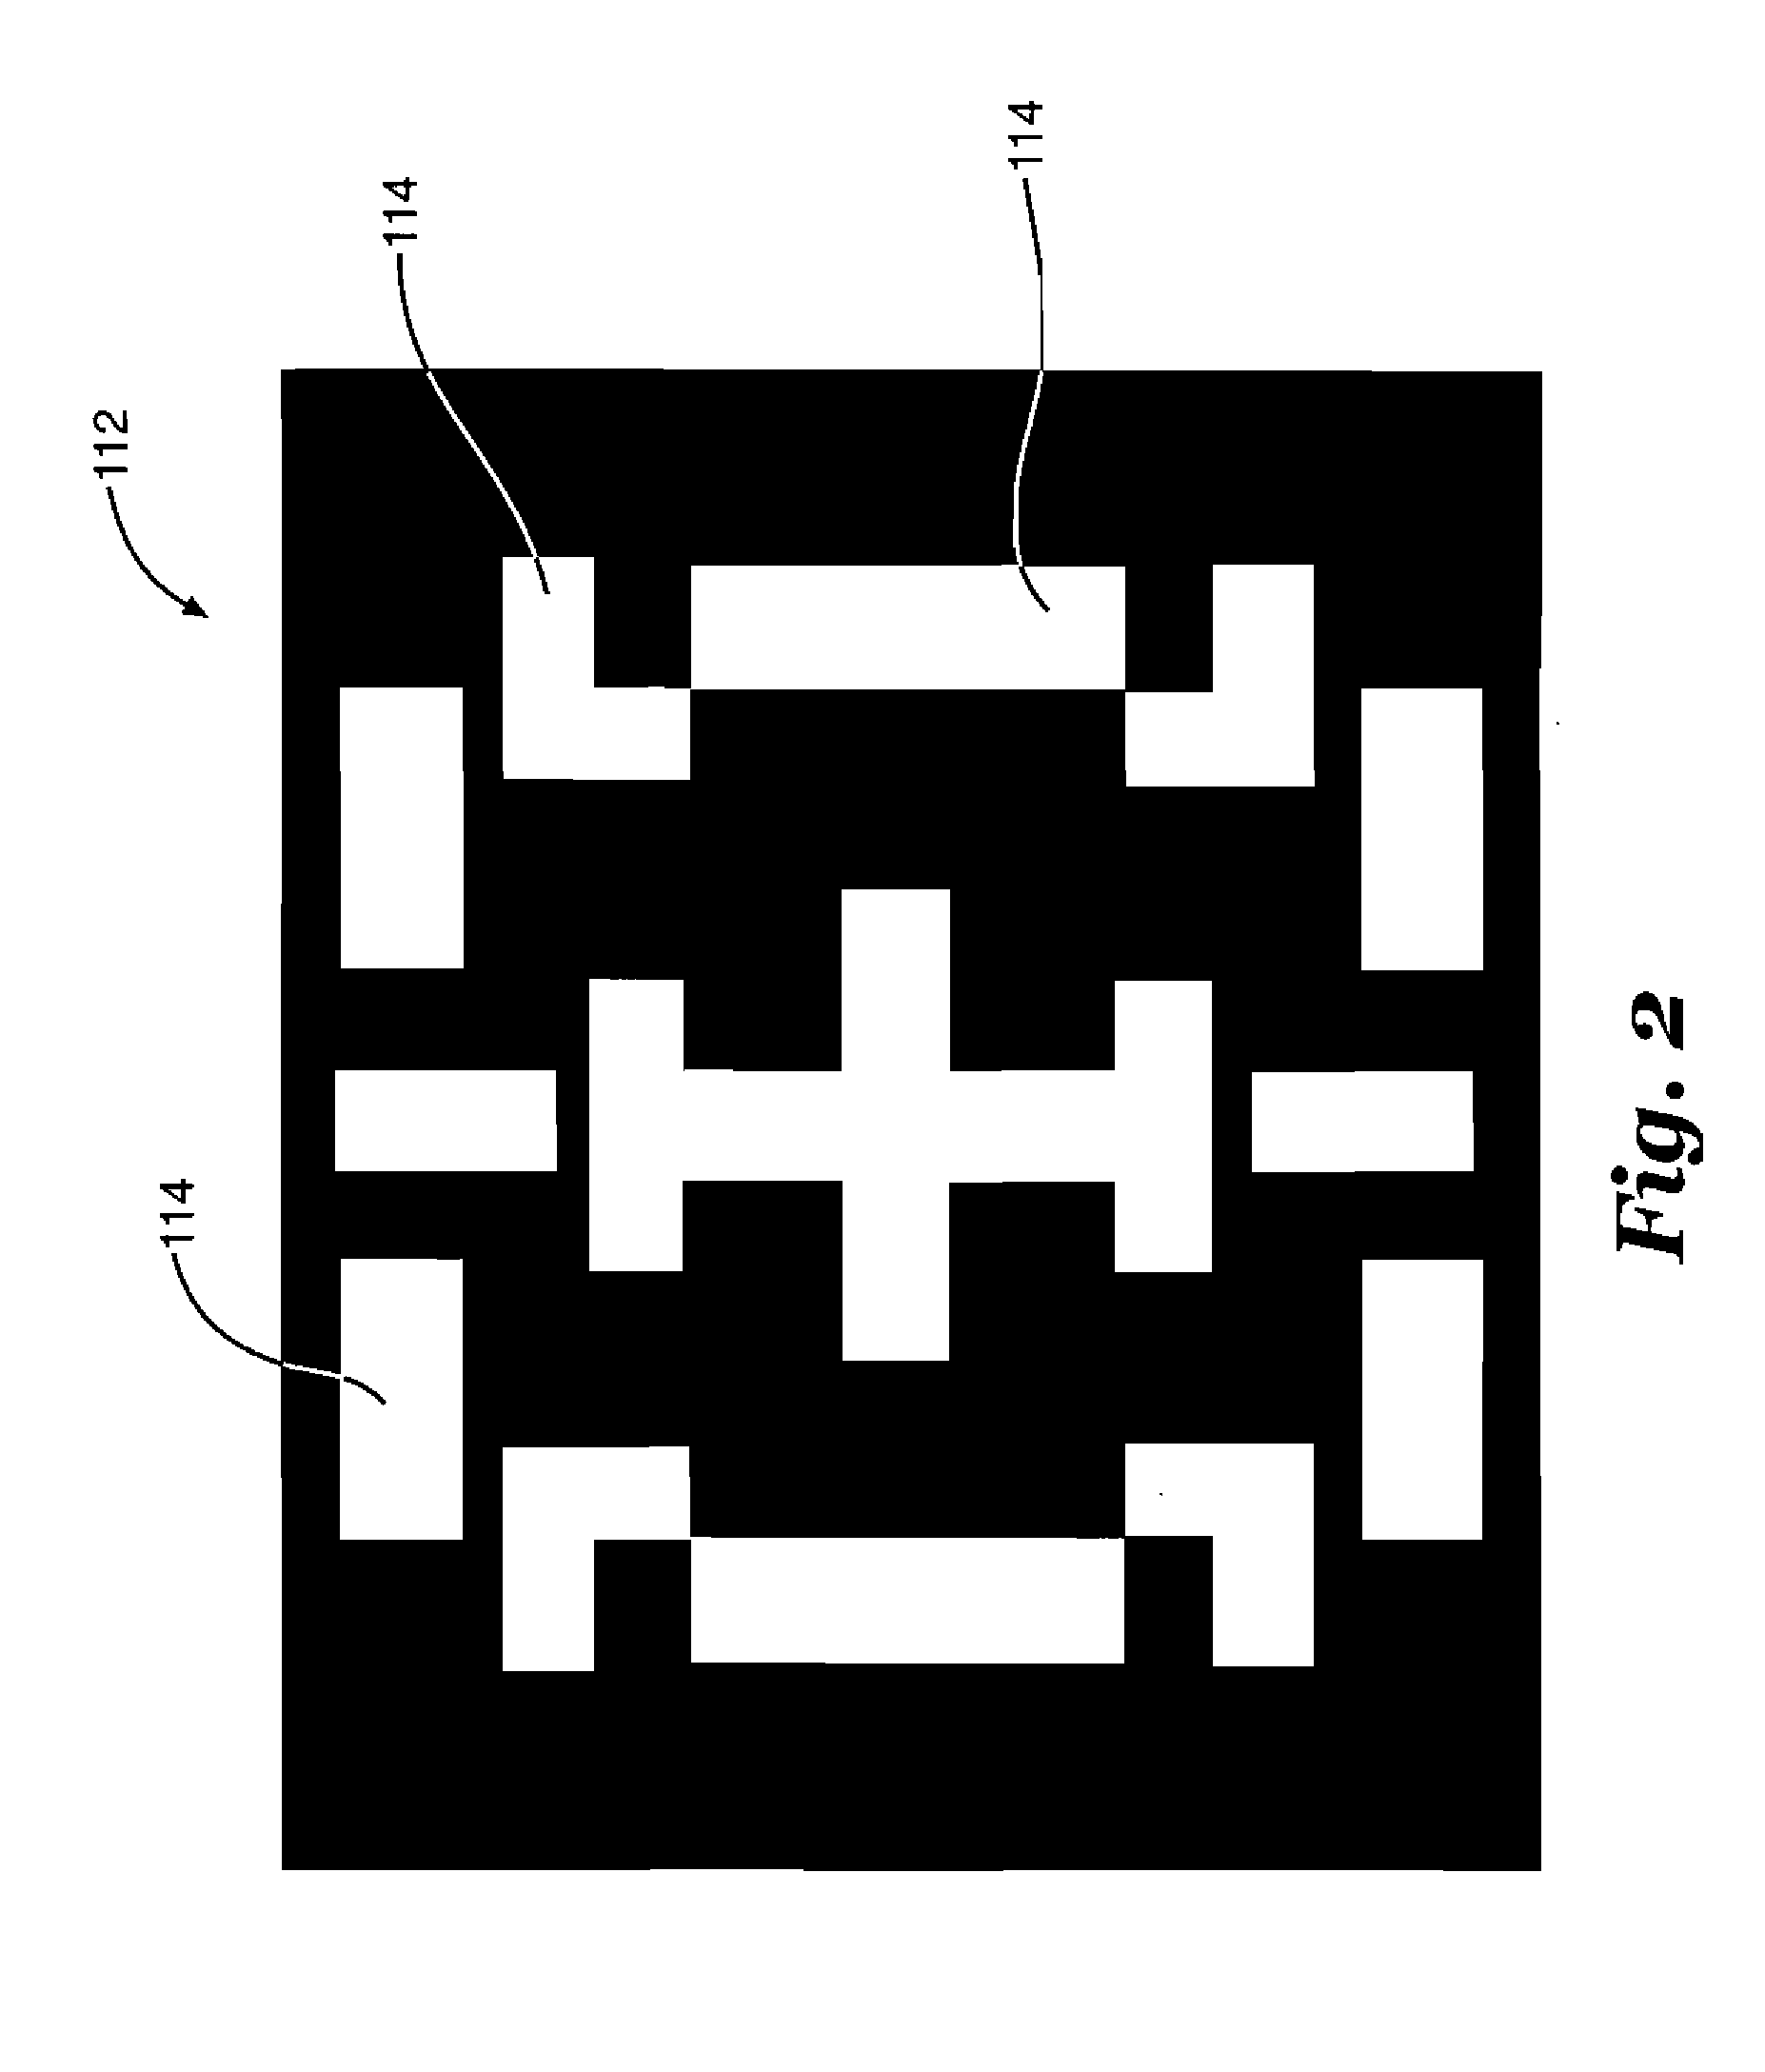 Coded aperture aided navigation and geolocation systems